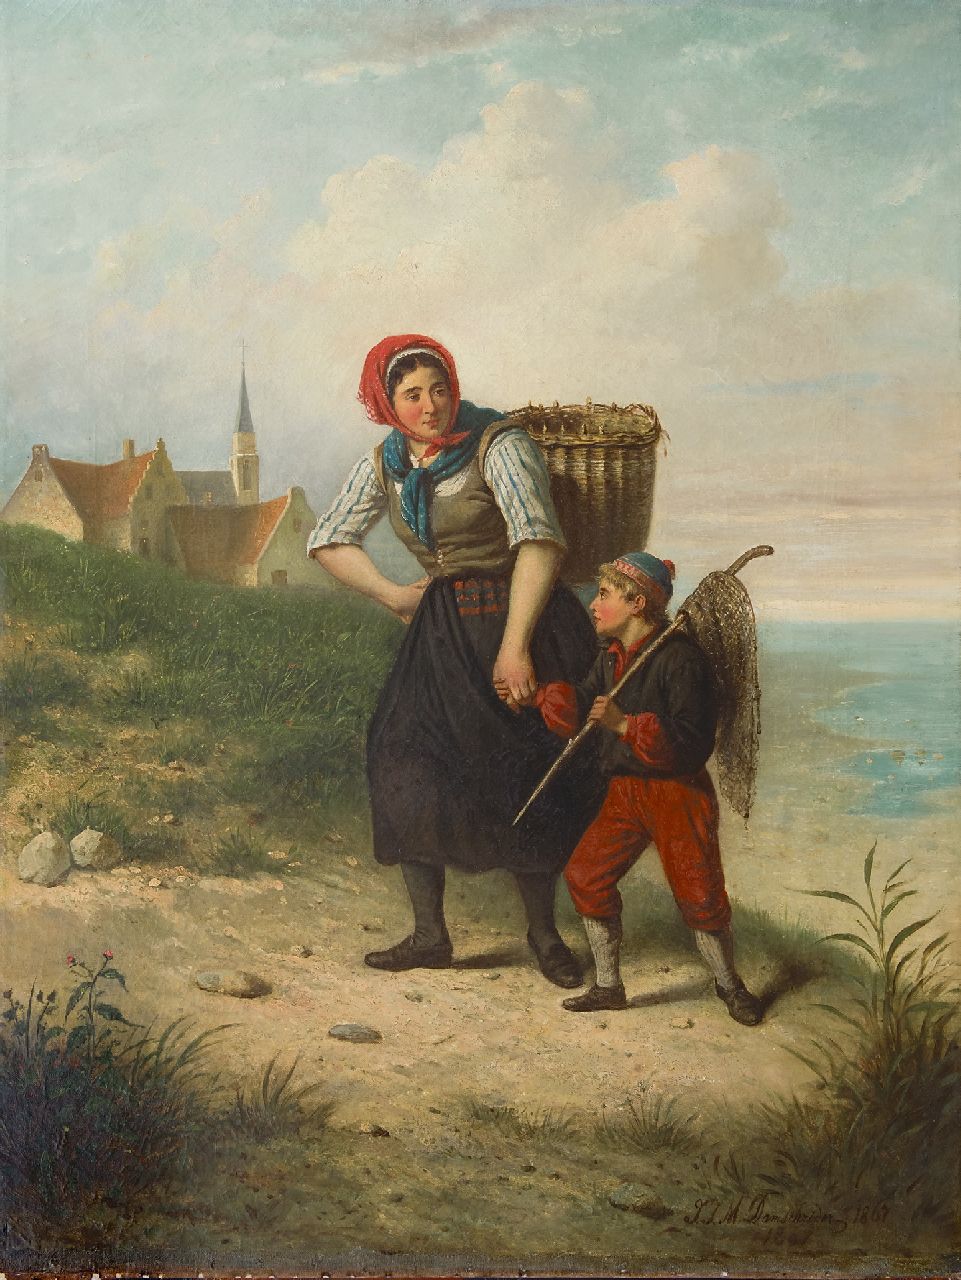 Damschreuder J.J.M.  | Jan Jacobus Matthijs Damschreuder | Paintings offered for sale | A fisherman's wife with her child in the dunes, oil on canvas 93.6 x 71.1 cm, signed l.r. and dated 1867